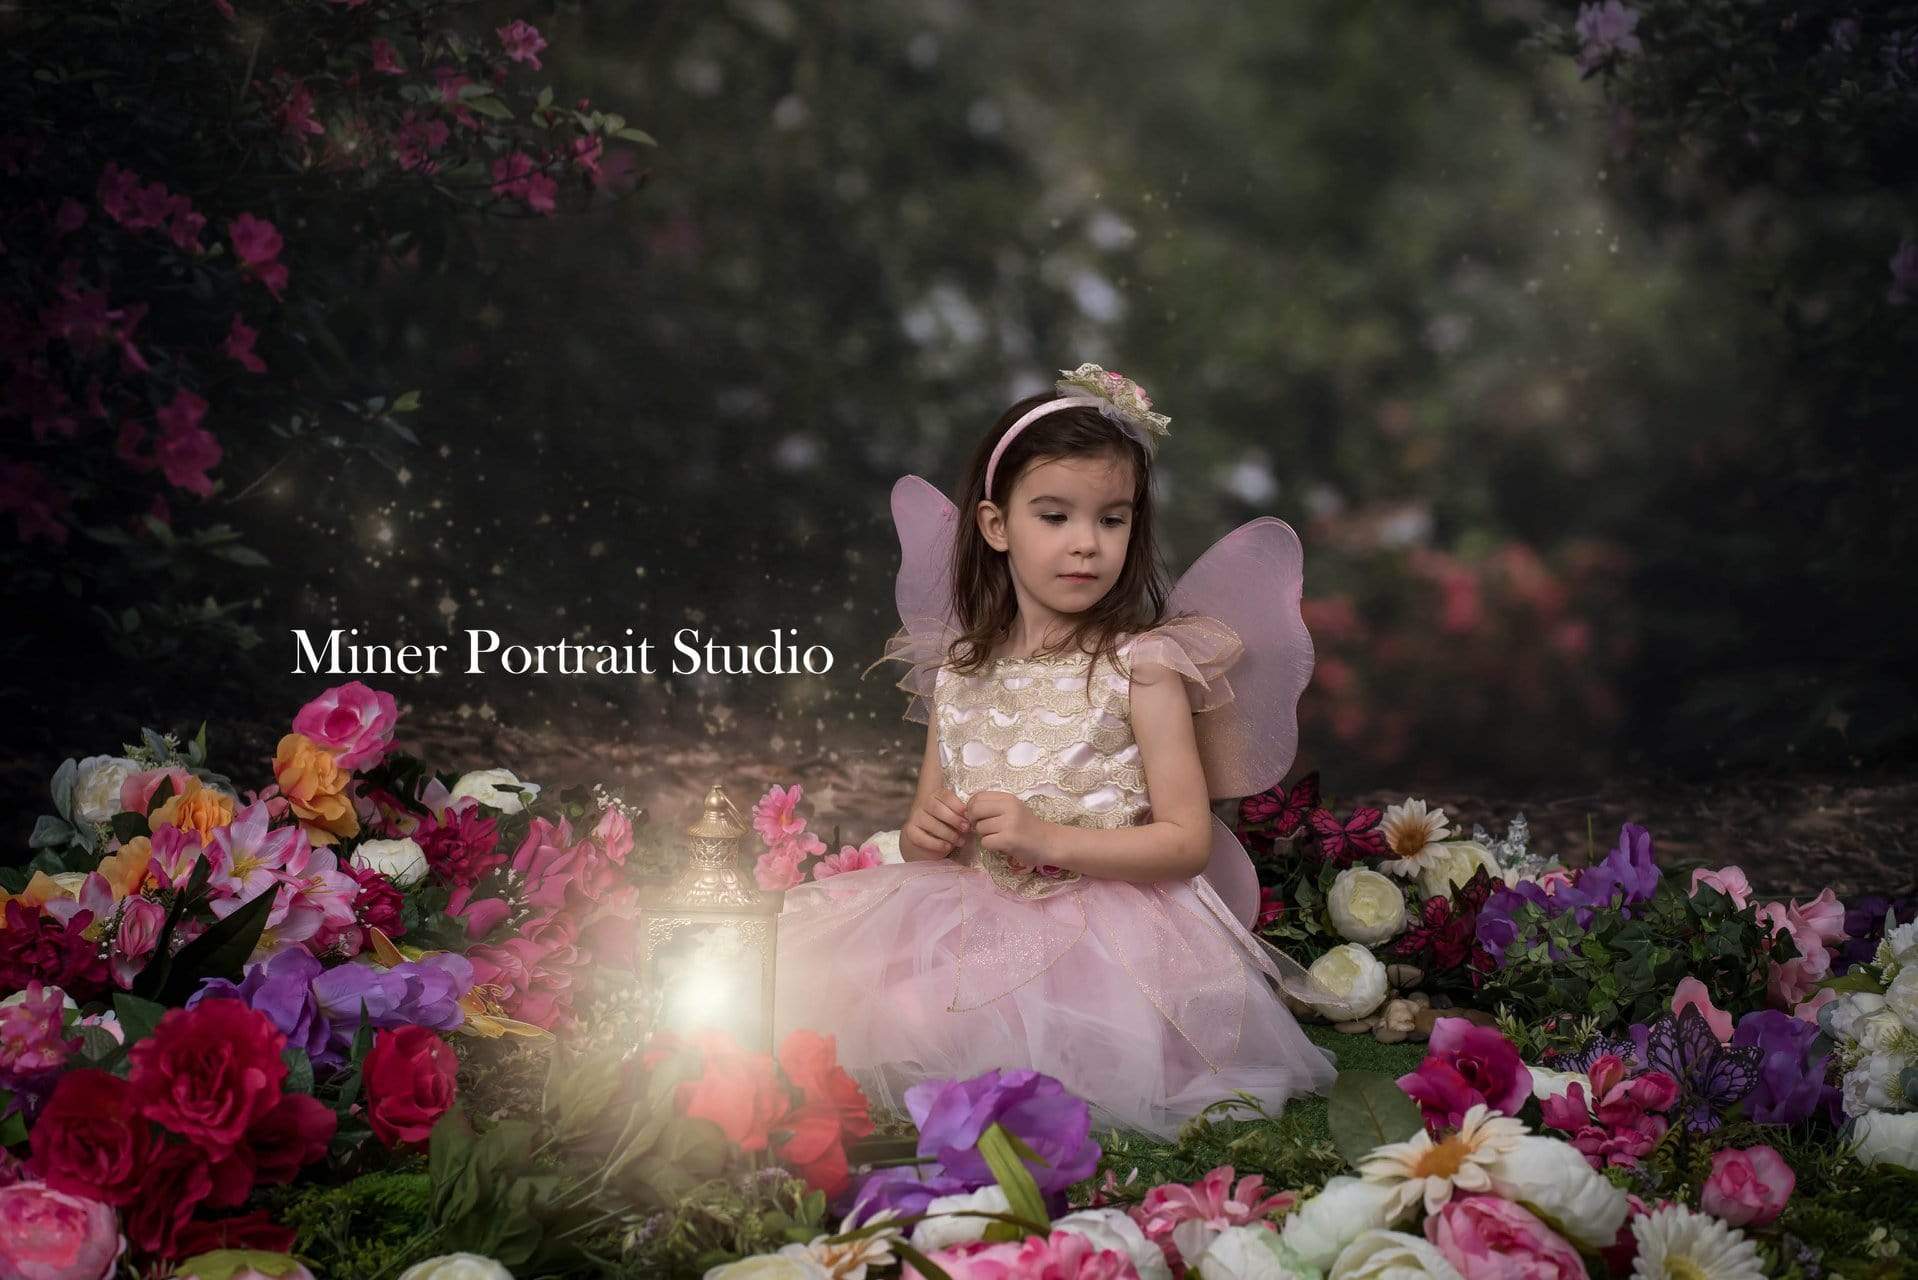 Katebackdrop鎷㈡綖Kate Pink Floral Garden Fairy Lights spring Backdrop for Photography Designed by Pine Park Collection